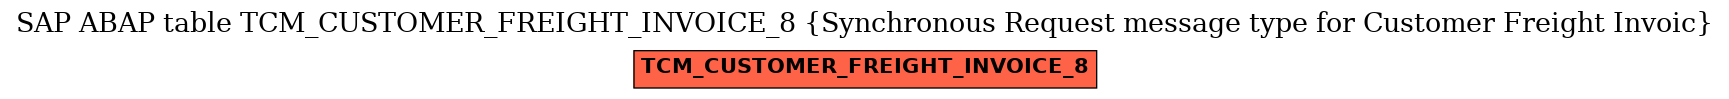 E-R Diagram for table TCM_CUSTOMER_FREIGHT_INVOICE_8 (Synchronous Request message type for Customer Freight Invoic)